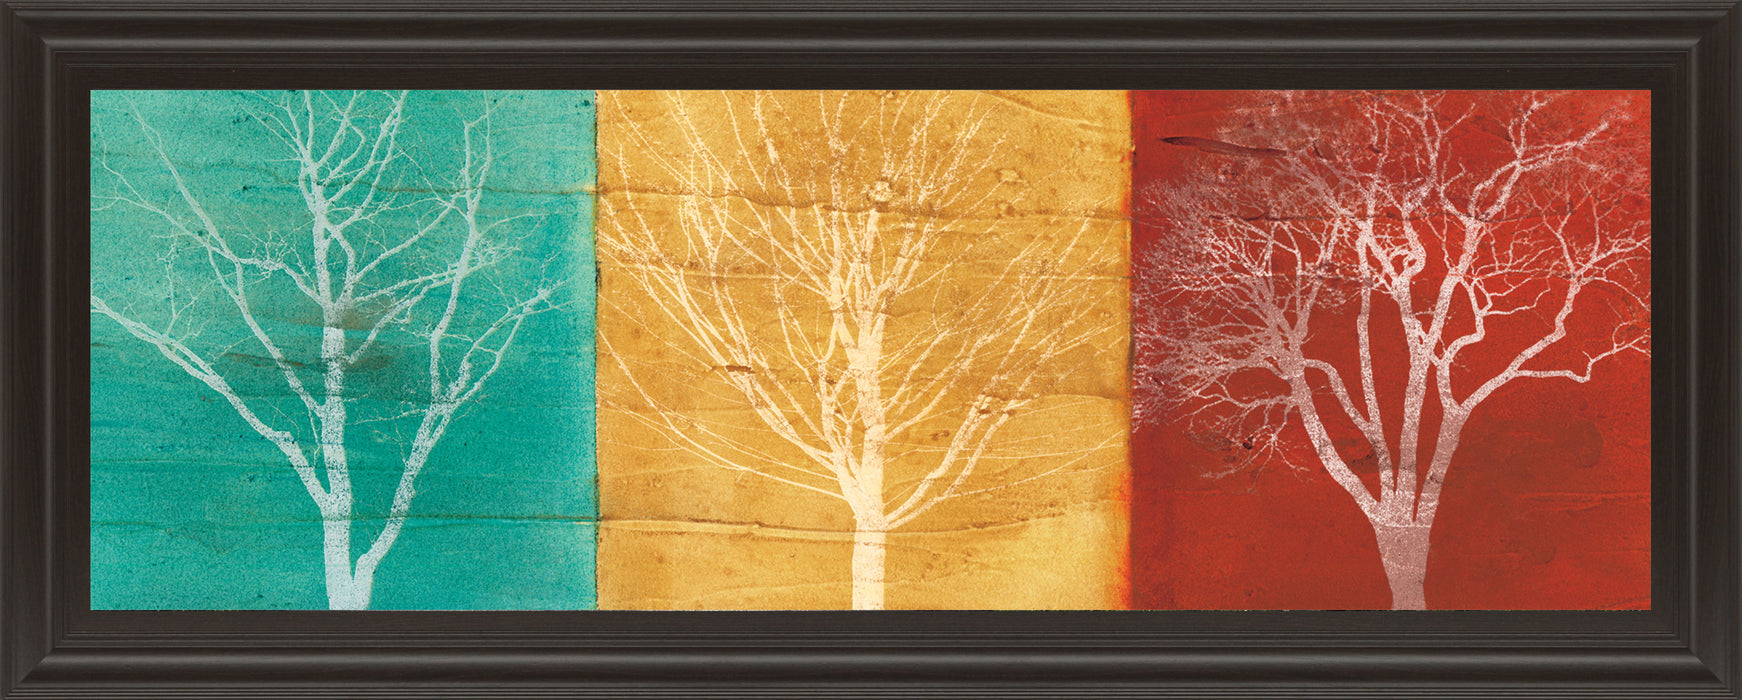 Fallen Leaves By Stephane Fontaine - Framed Print Wall Art - Red